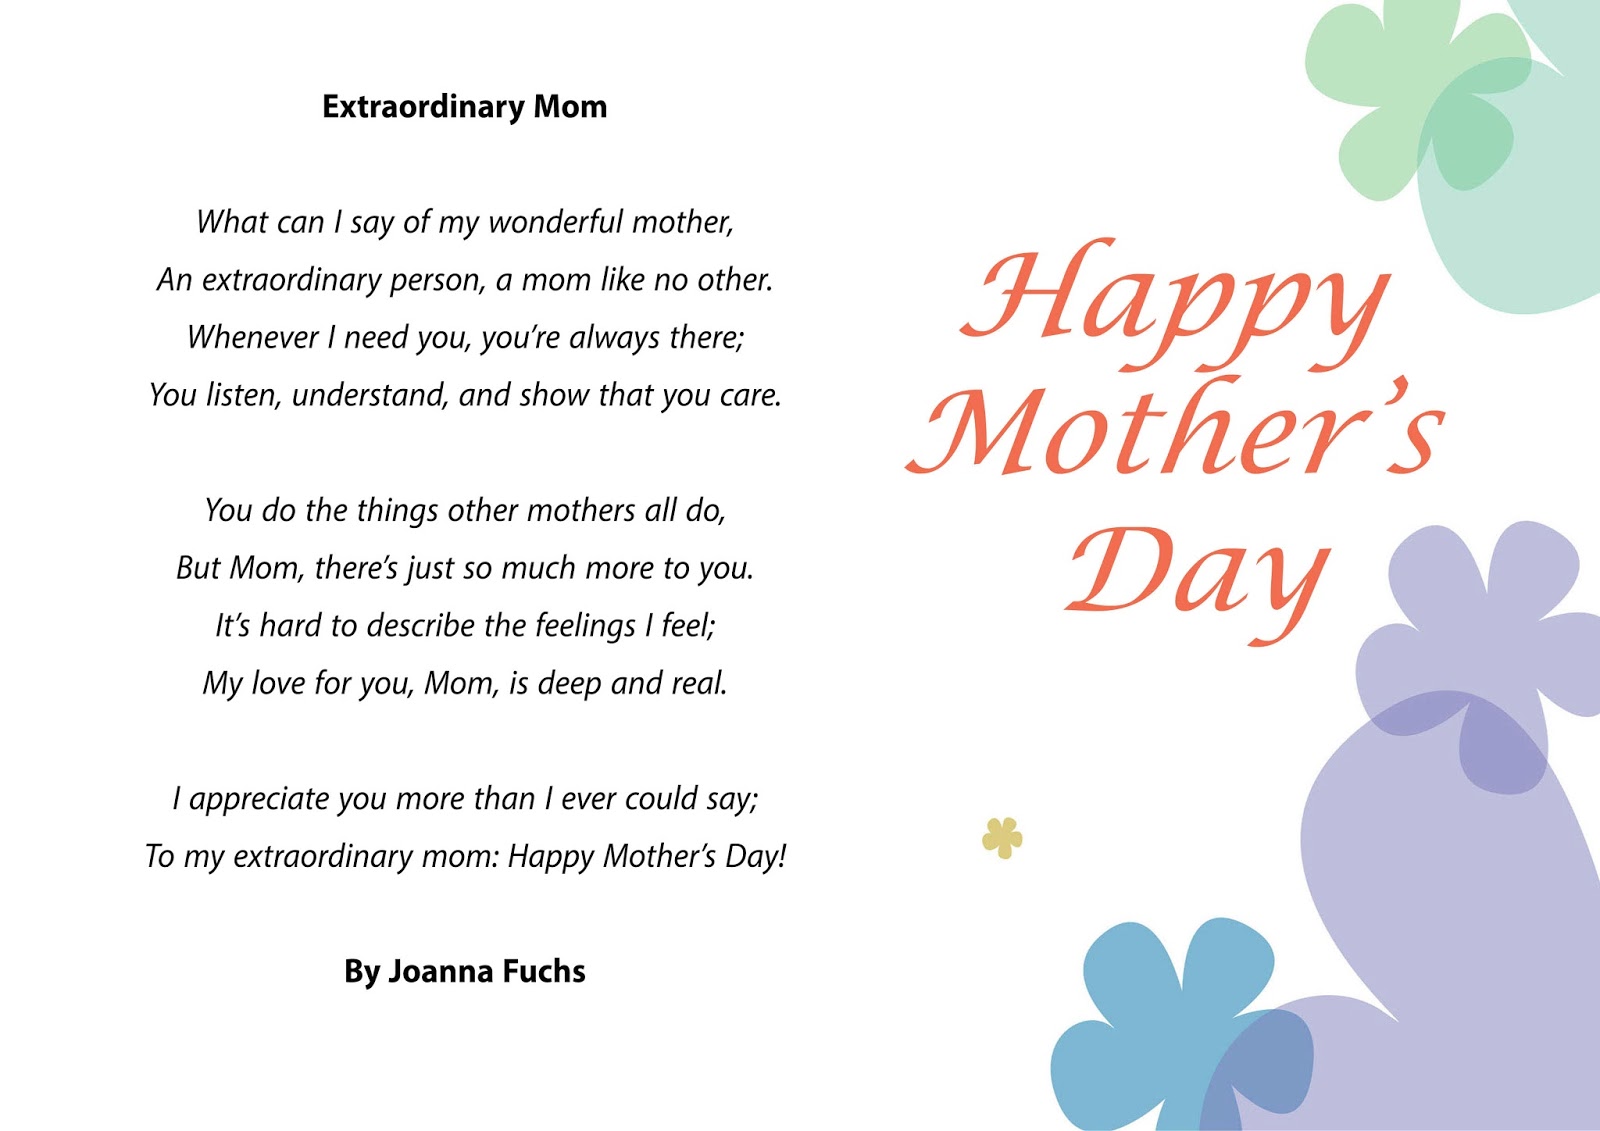 A Mother's Day Poem - Mother's Day Gift Idea. mother%2Bday%2Bpoem...